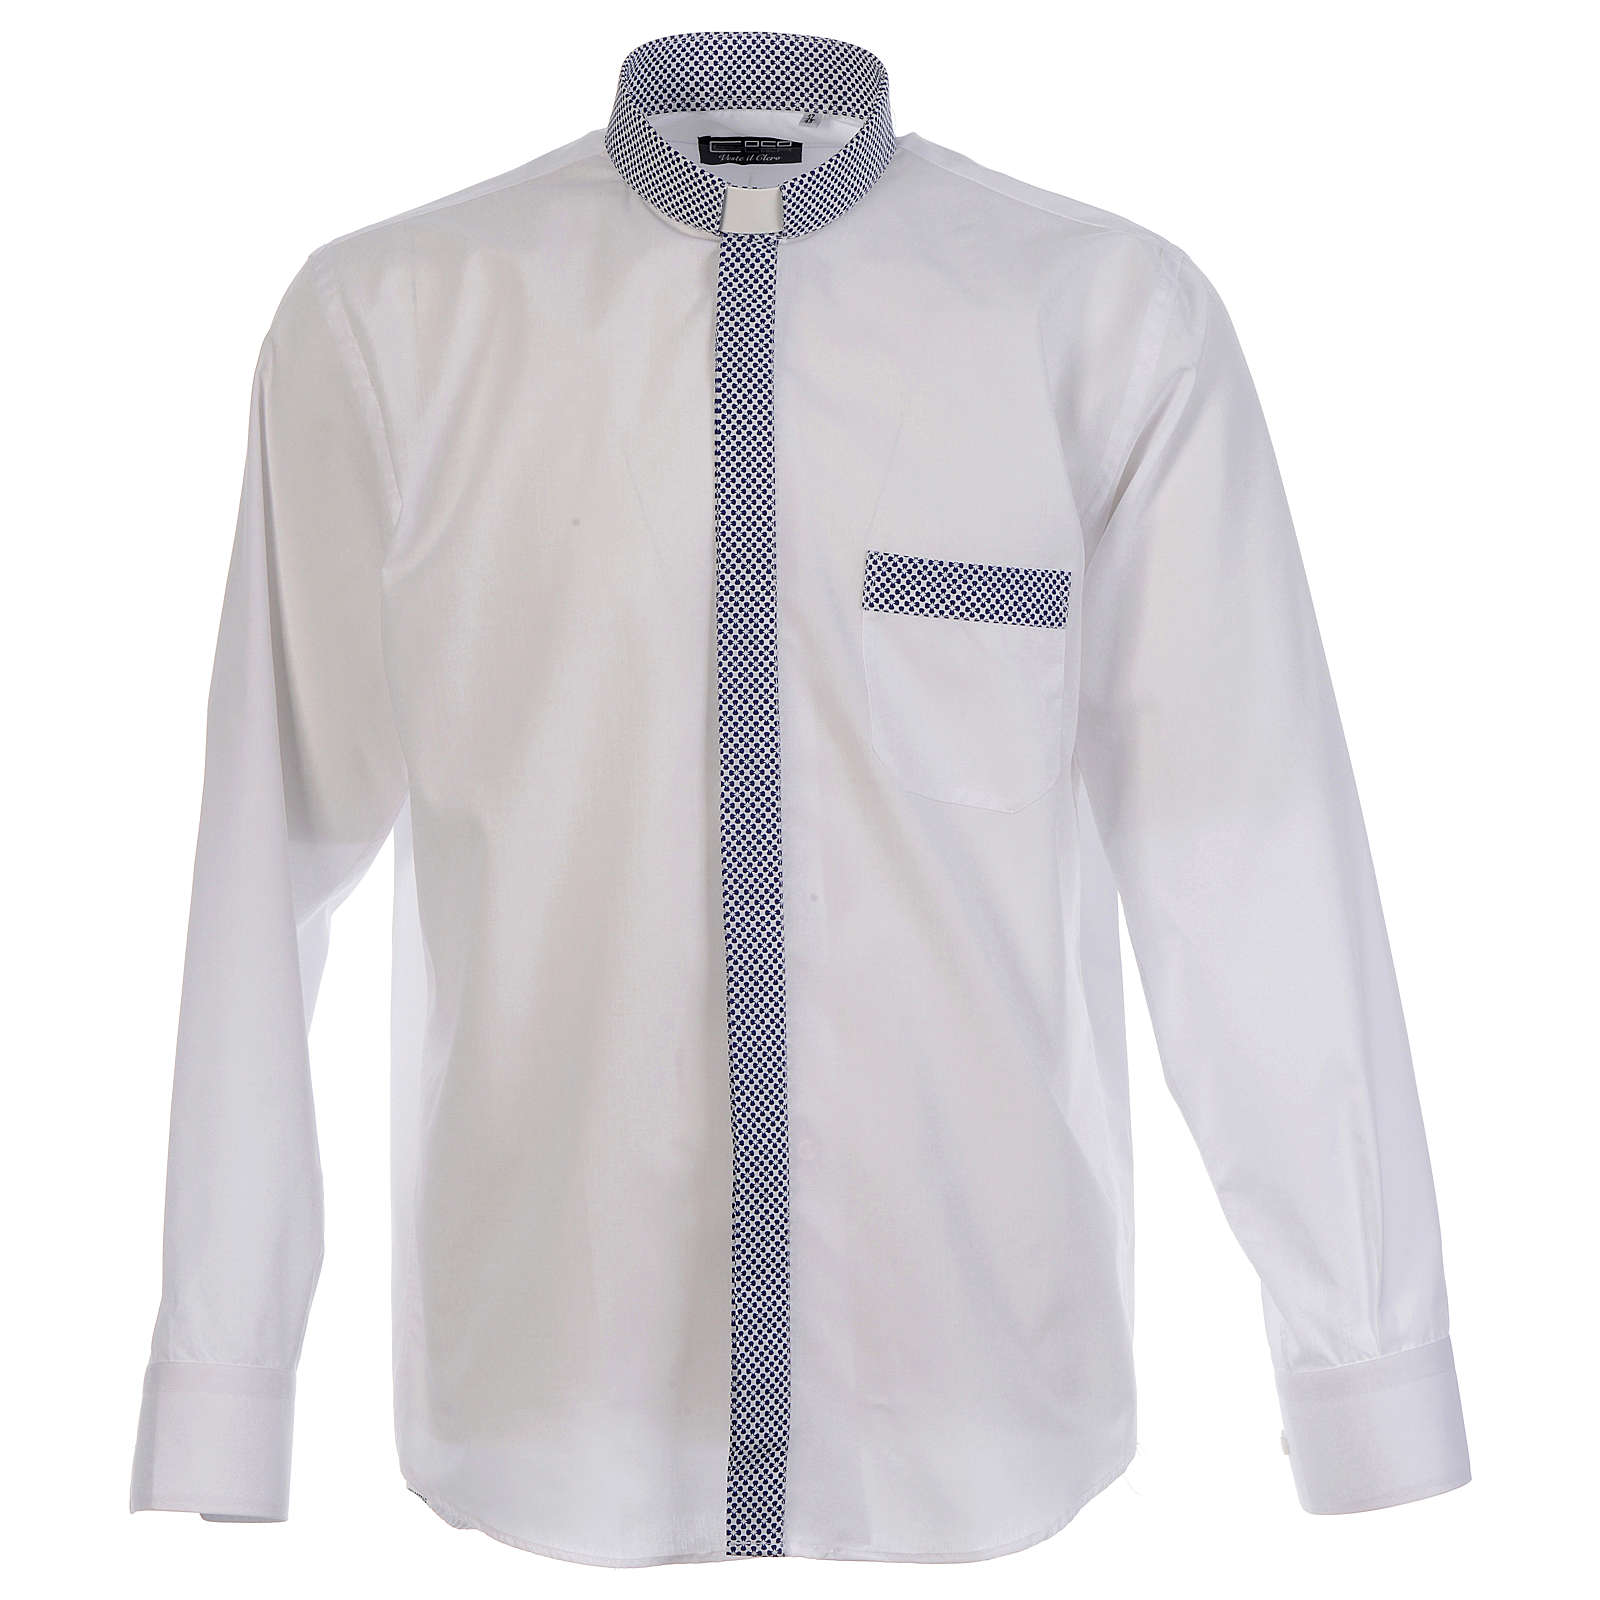 Clergy shirt white contrast crosses long sleeve | online sales on ...